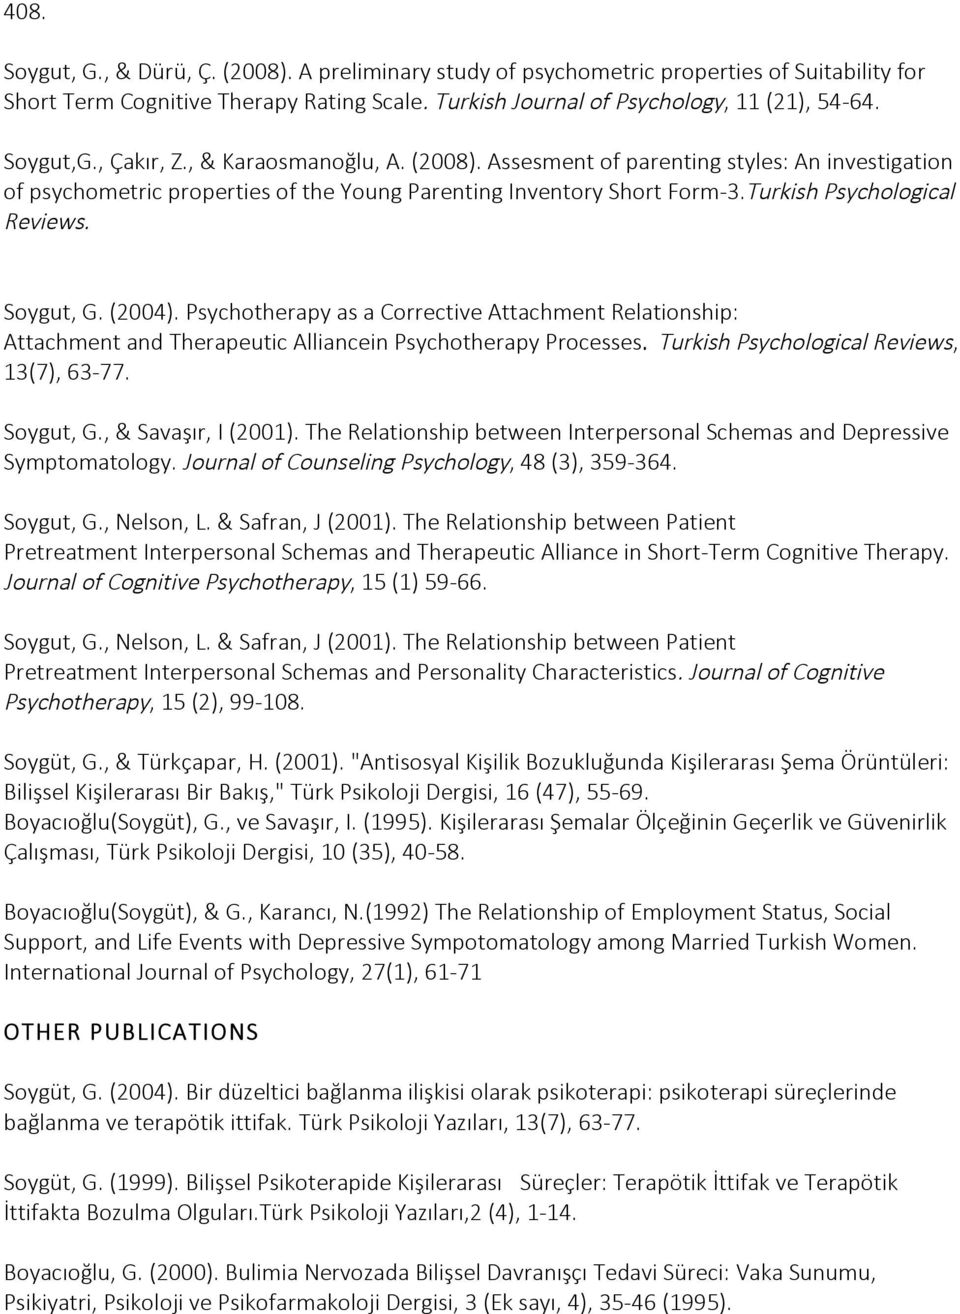 Turkish Psychological Reviews. Soygut, G. (2004). Psychotherapy as a Corrective Attachment Relationship: Attachment and Therapeutic Alliancein Psychotherapy Processes.